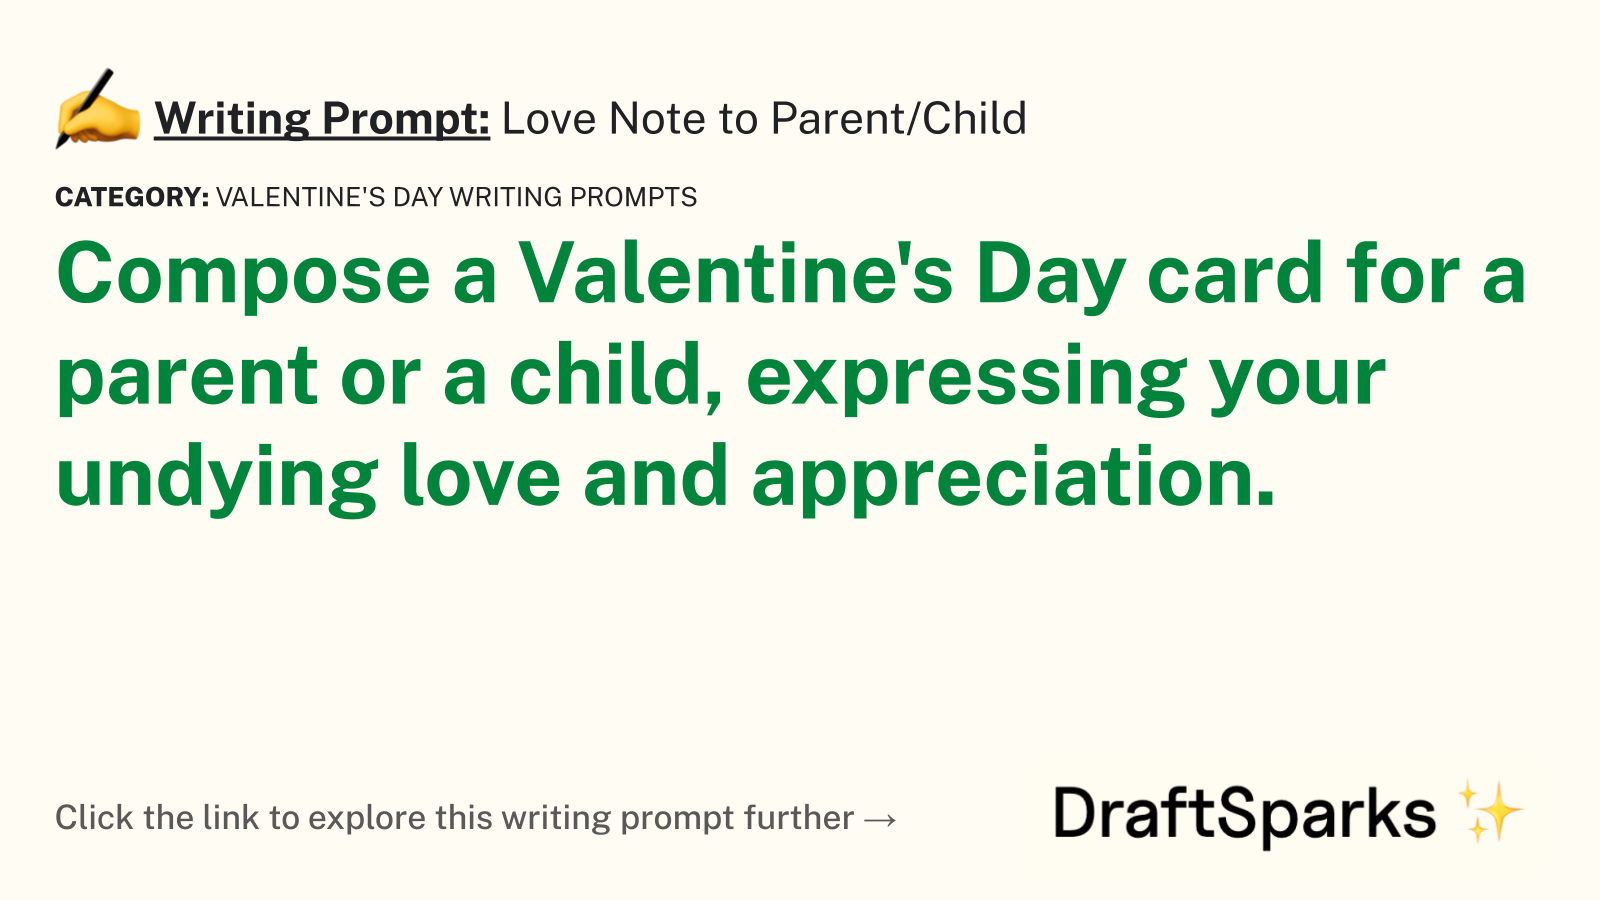 Love Note to Parent/Child